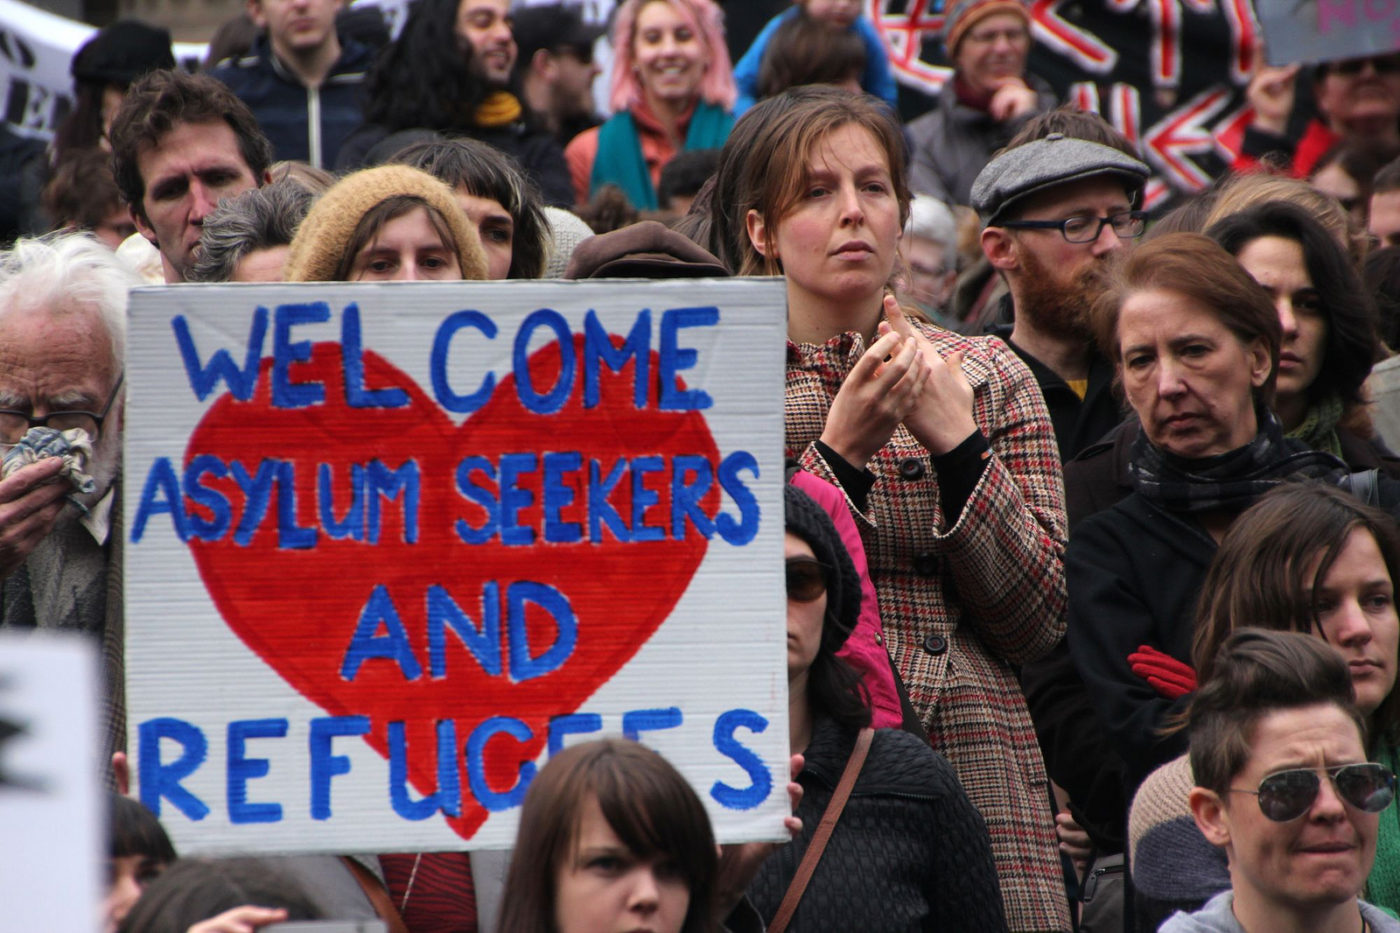 "Welcome asylum seekers and refugees."